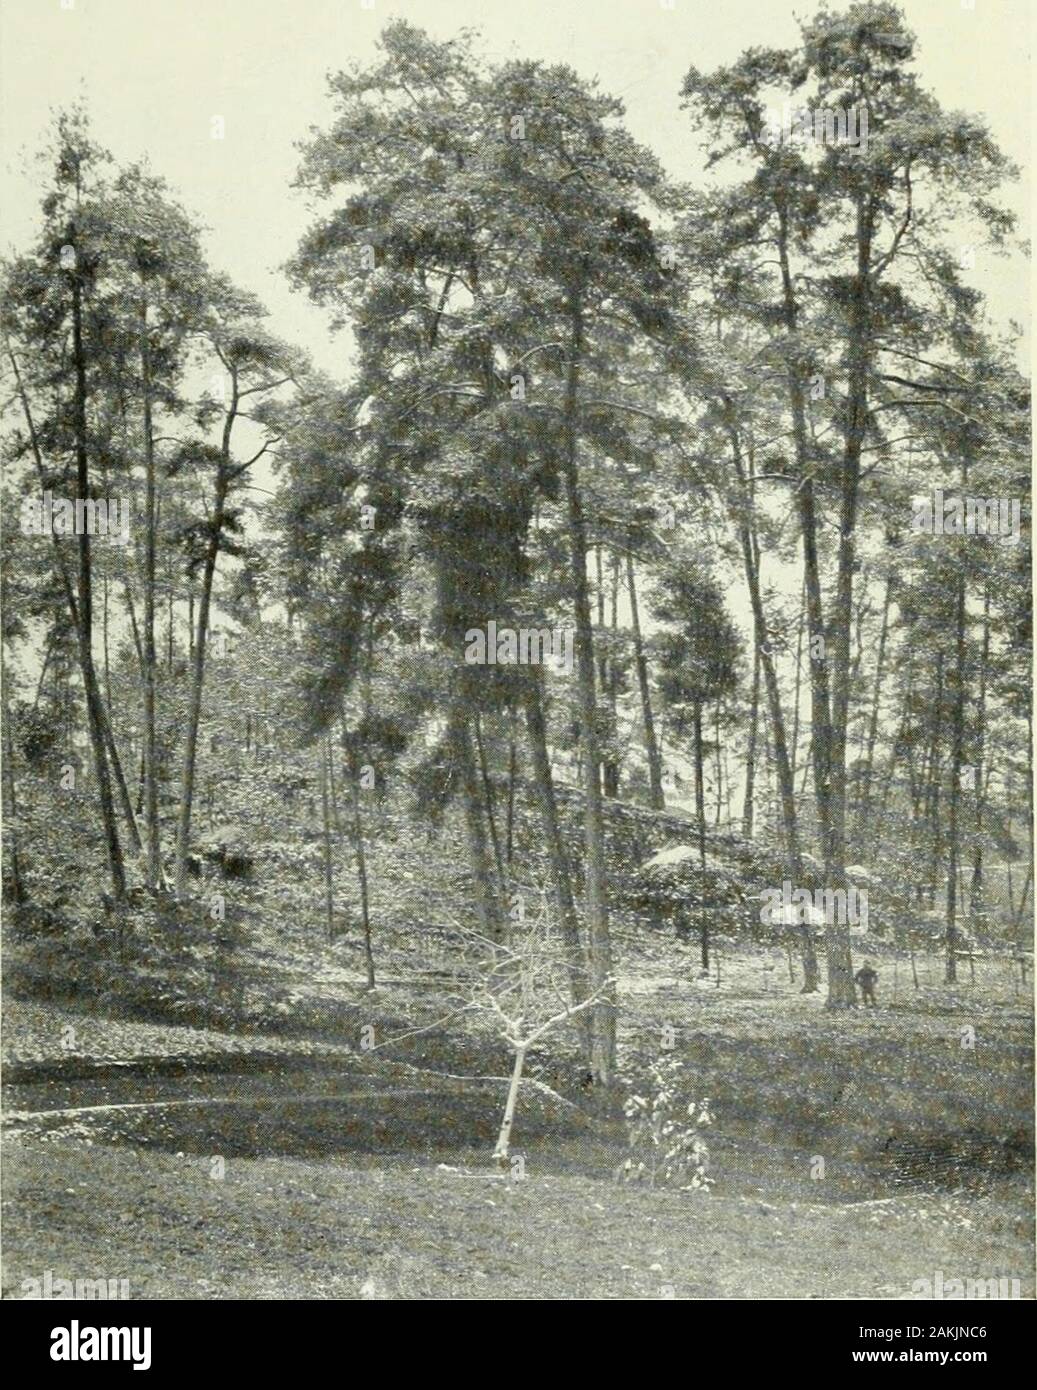 A naturalist in Western China : with vasculum, camera, and gun, being some account of eleven year's travel, exploration, and observation in the more remote parts of the flowery kingdom; . ed for buildingpurposes. Cupressus torulosa (Kan-peh sha) occurs in the aridvalleys of the west ; Taxus ctispidata, var. chinensis (Tuen-chu sha), and Kdelceria Davidiana (Yu sha or Oil Fir) arefound scattered all over Western China between 2000 and5000 feet altitude, but are nowhere really abundant. From Ichang westward, up to 3500 feet altitude, the com-monest Conifer next to Pine is the Peh sha or White Fi Stock Photo